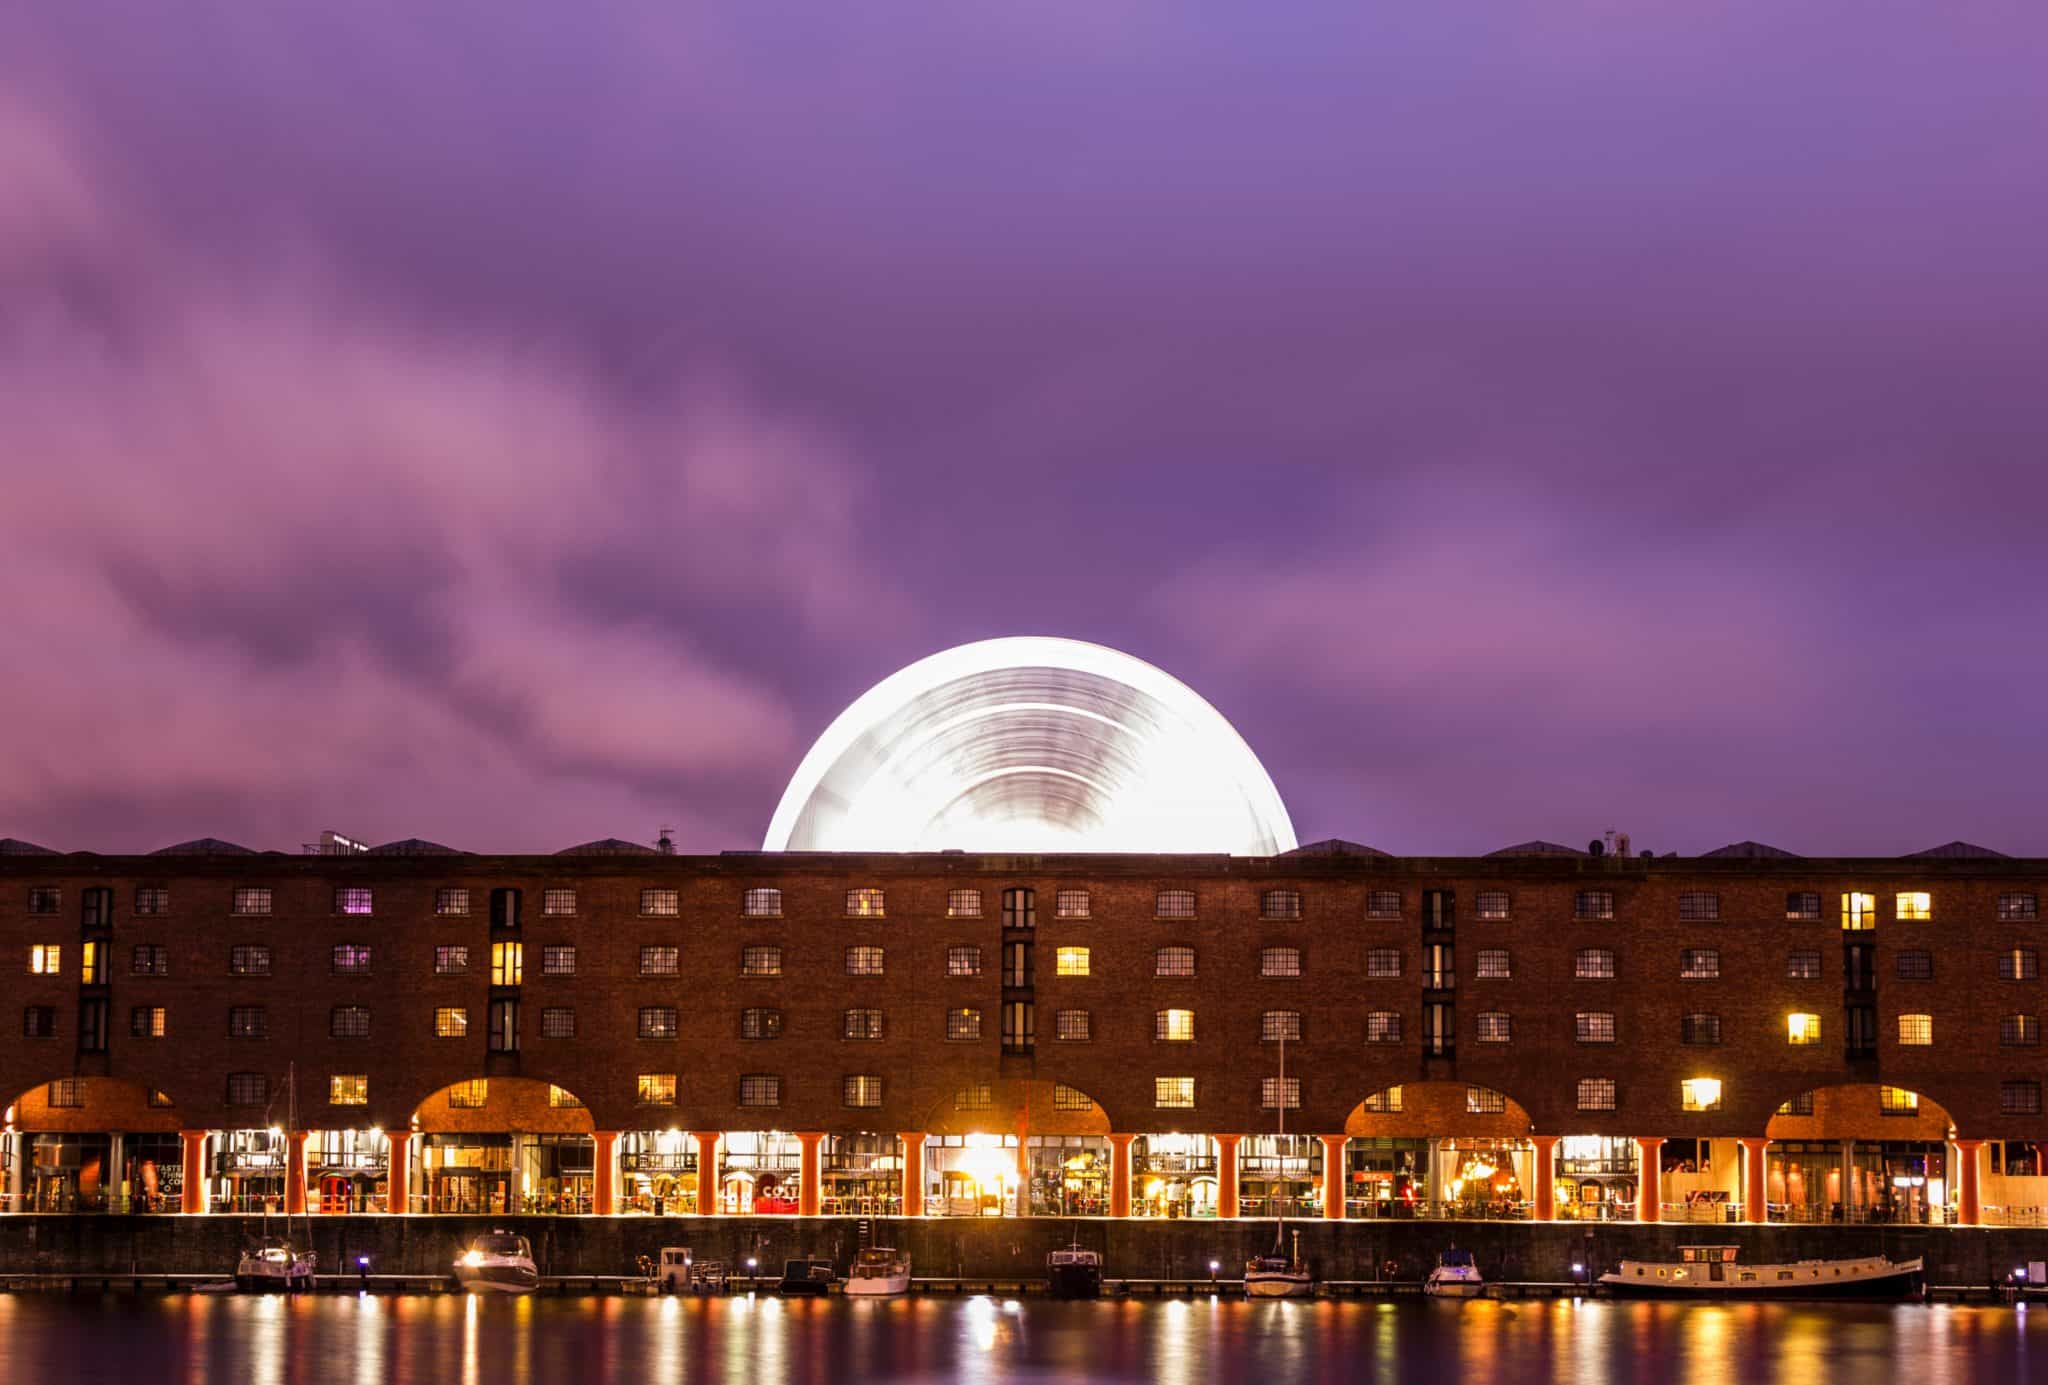 The Tate Liverpool lit up at night with a purple sky and light bouncing of the water. 